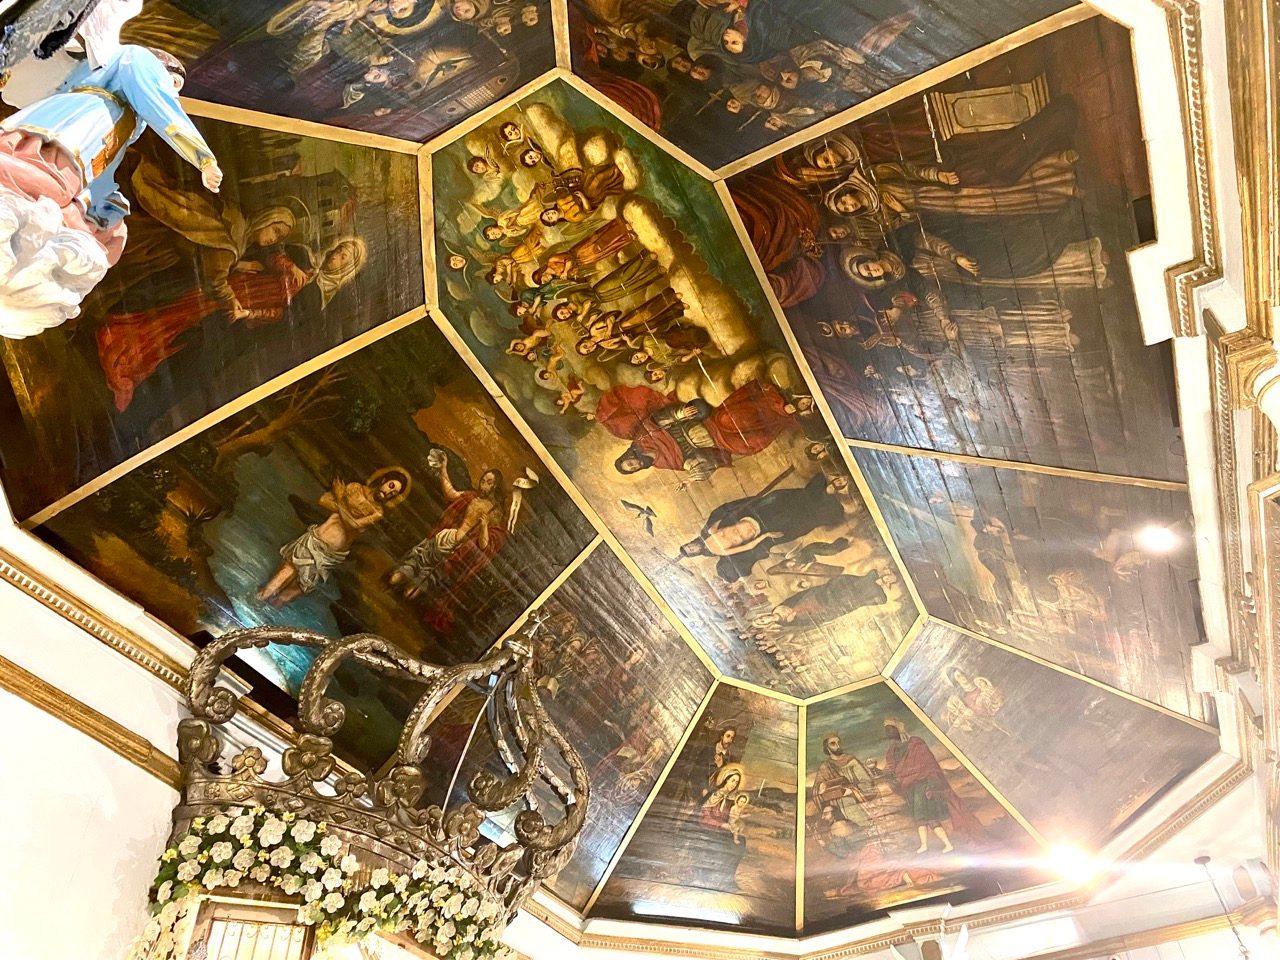 In Sta. Ana, Manila, centuries-old paintings under threat as Suntrust condo construction continues